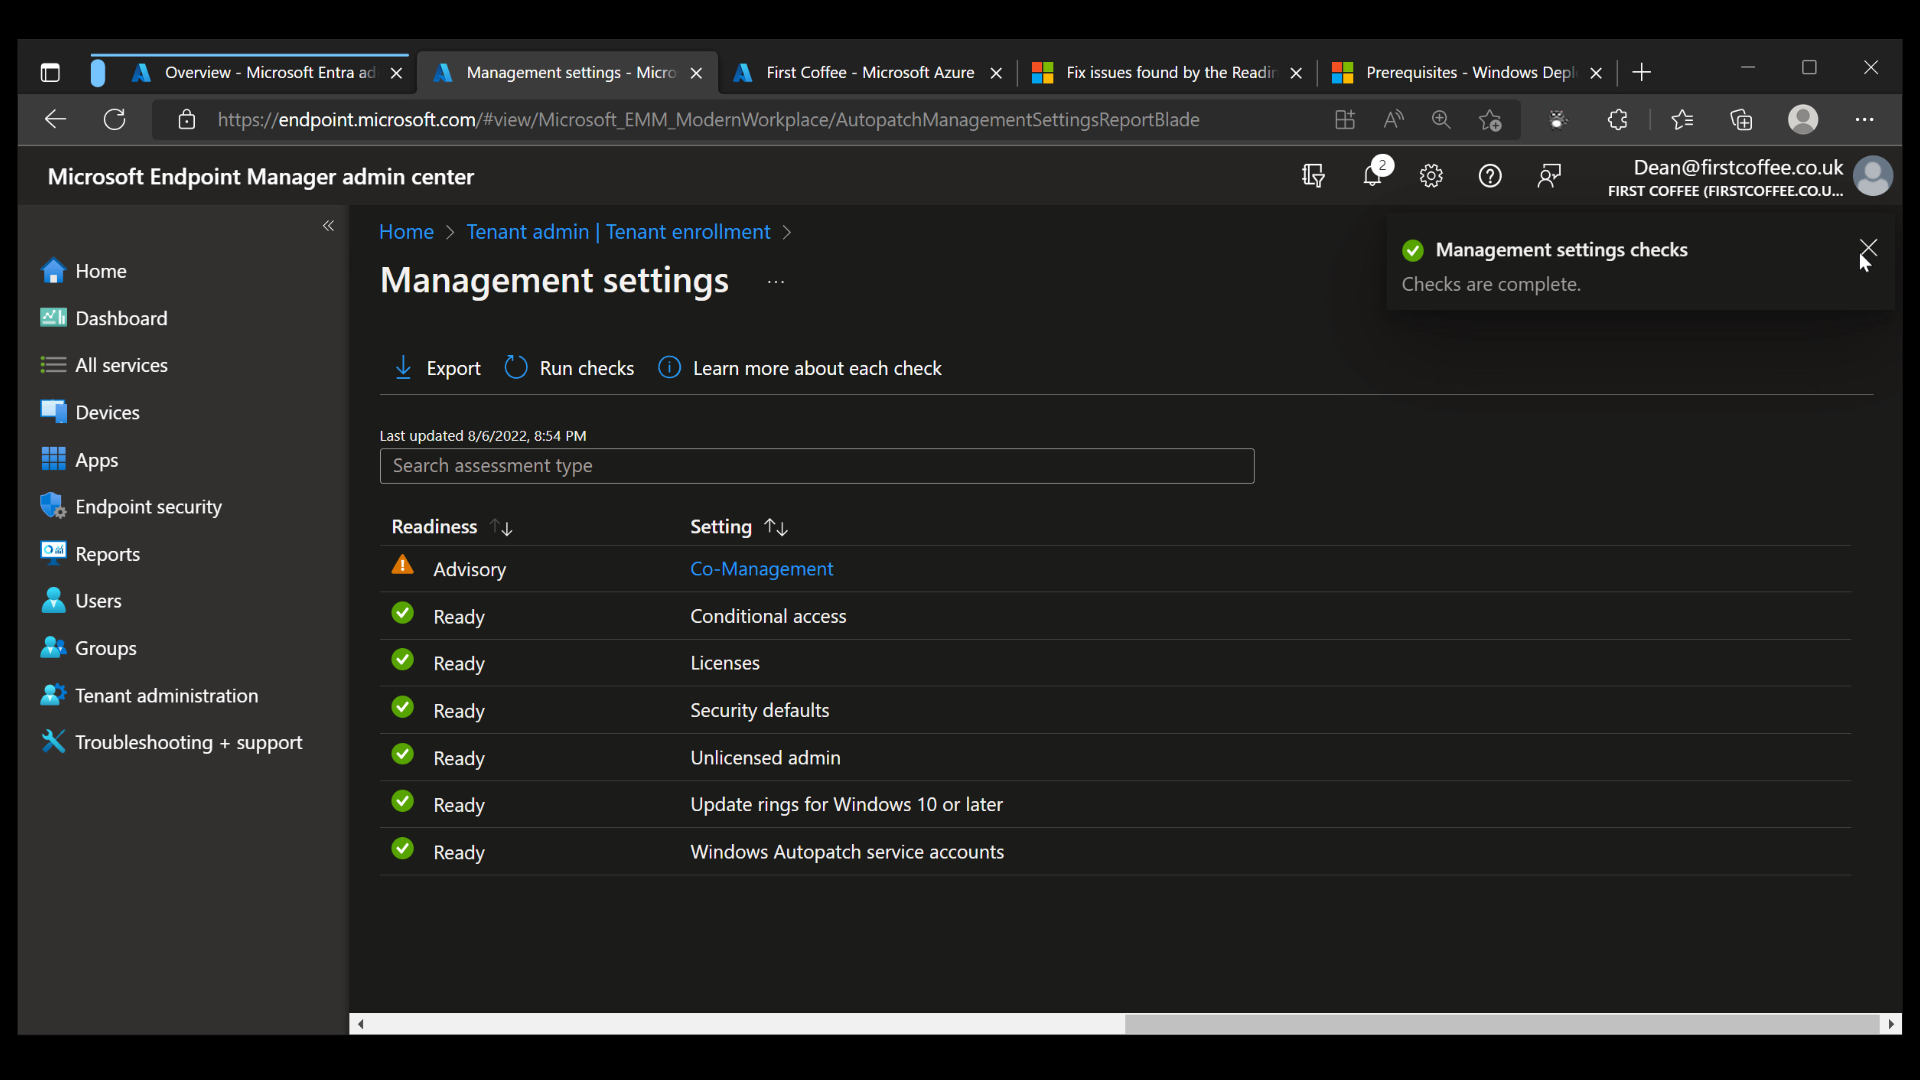 The Management setting checks for Windows Autopatch will complete within a few minutes